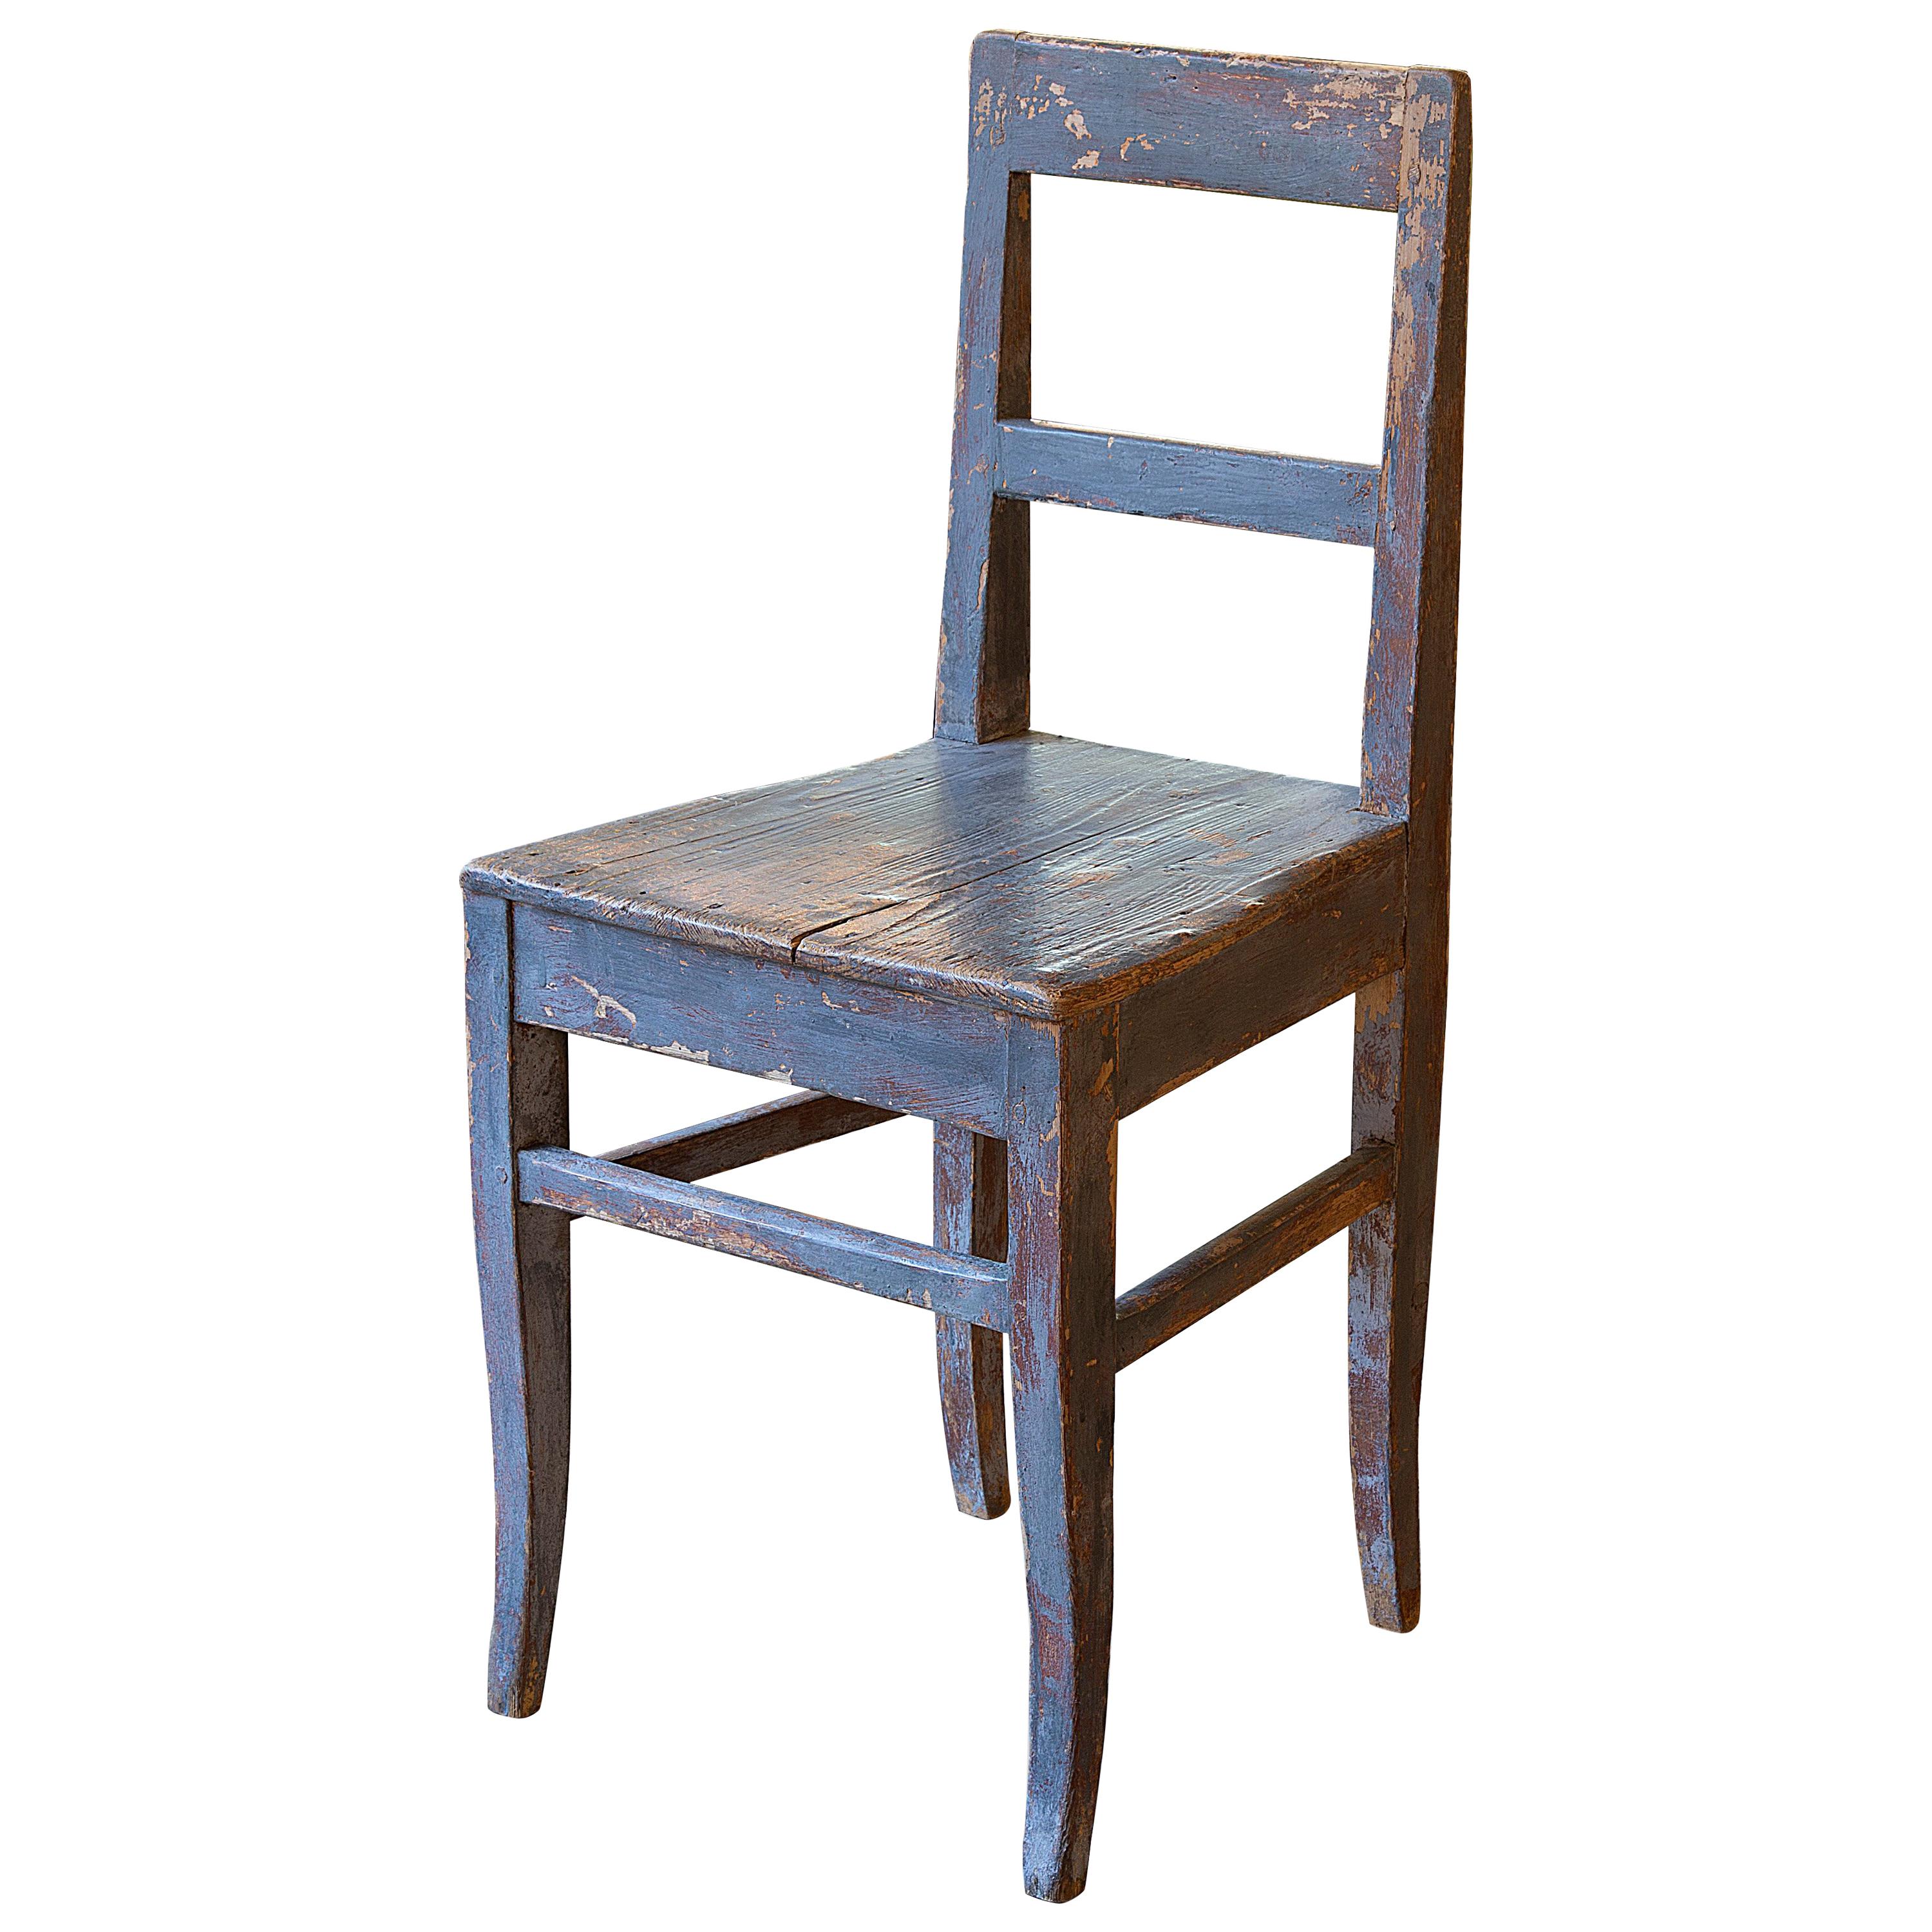 Charming 18th Century Painted Primitive Chair For Sale